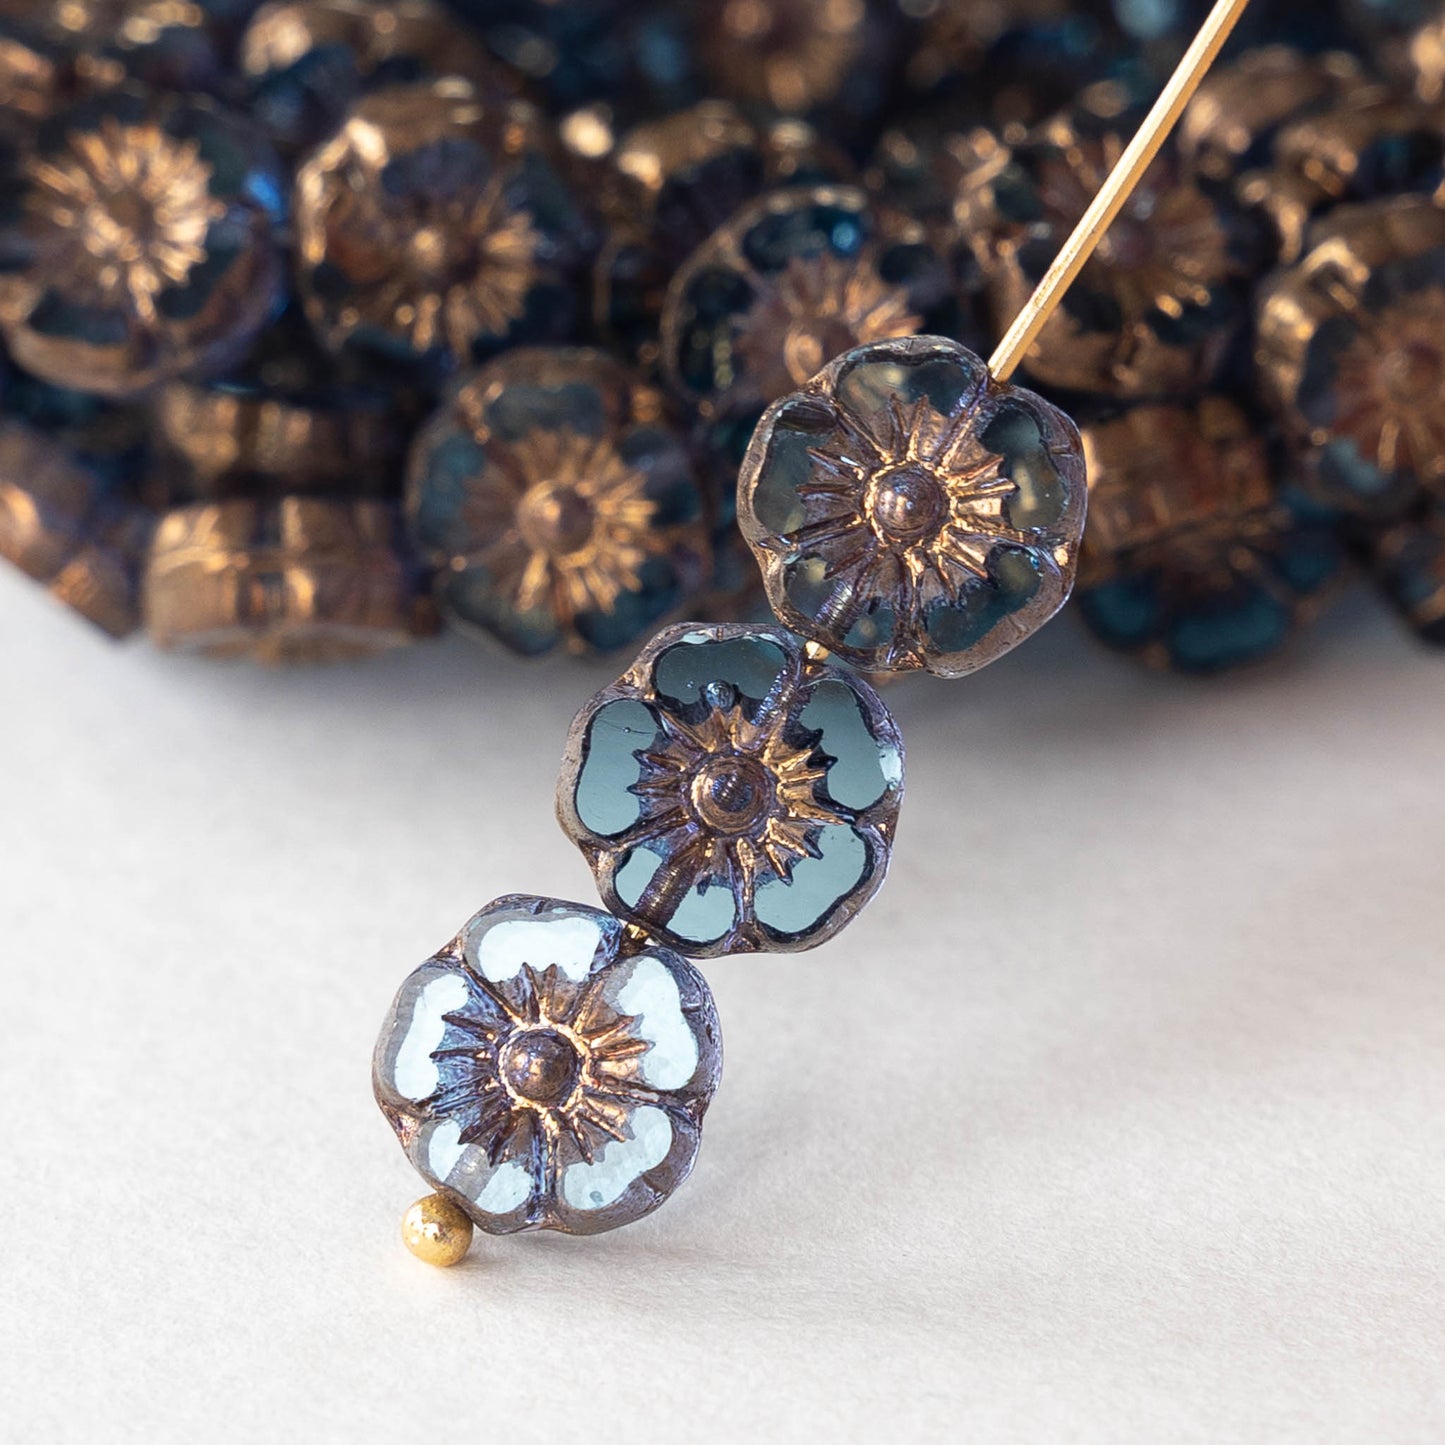 9mm Glass Flower Beads - Pale Blue with Copper Wash - 16 beads